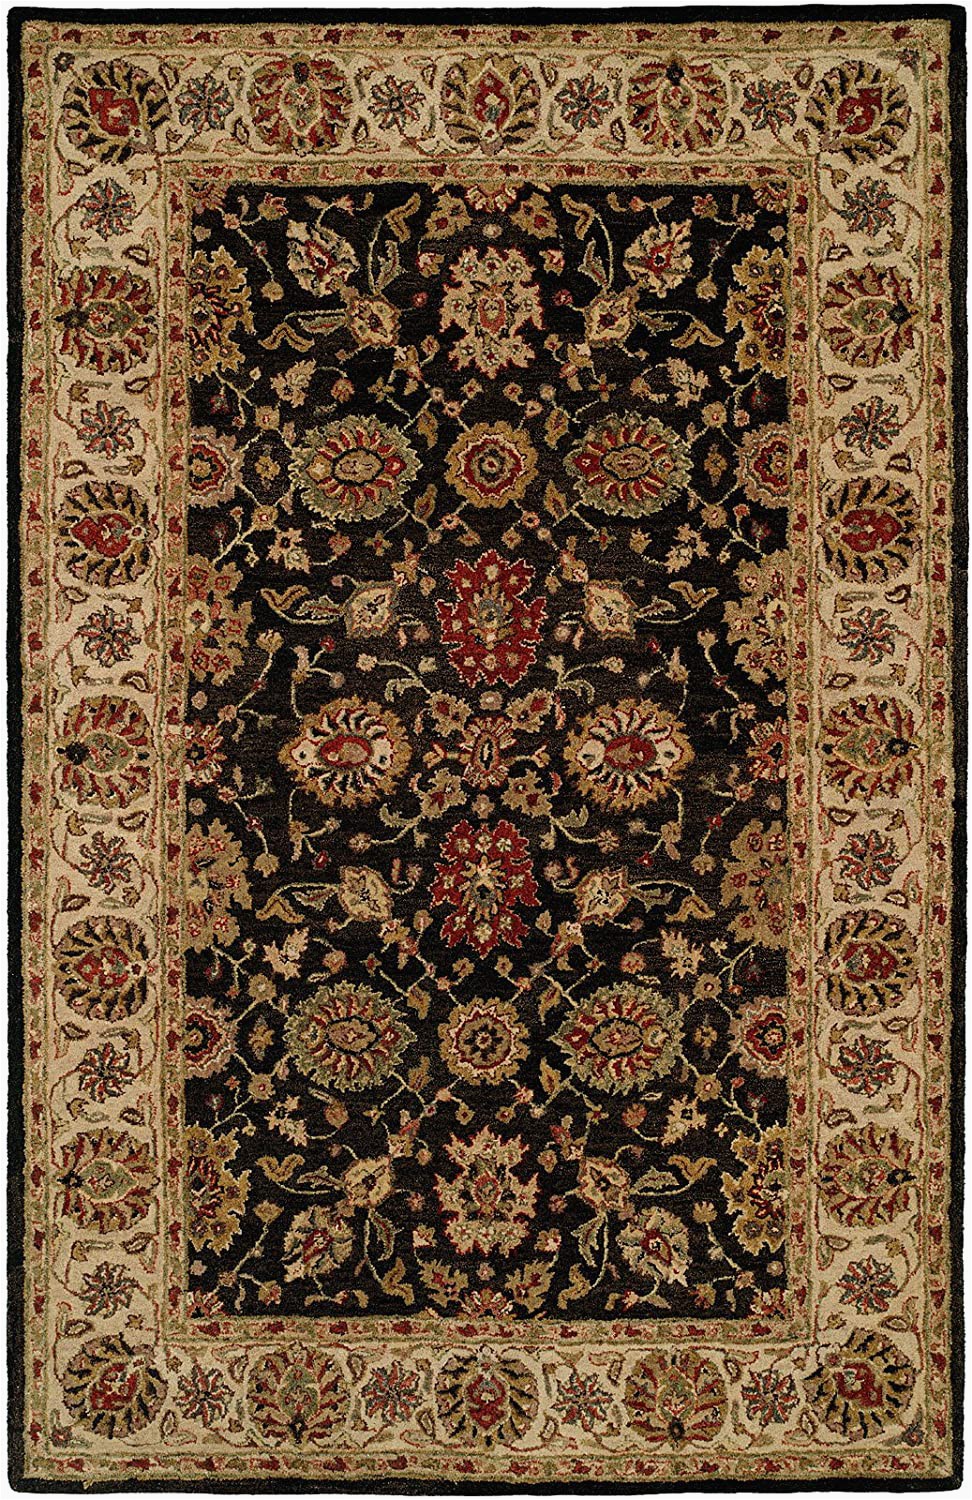 6 Foot by 9 Foot area Rugs Kalaty Empire Em 283 Hand Tufted area Rug 6 Feet by 9 Feet Black Ivory